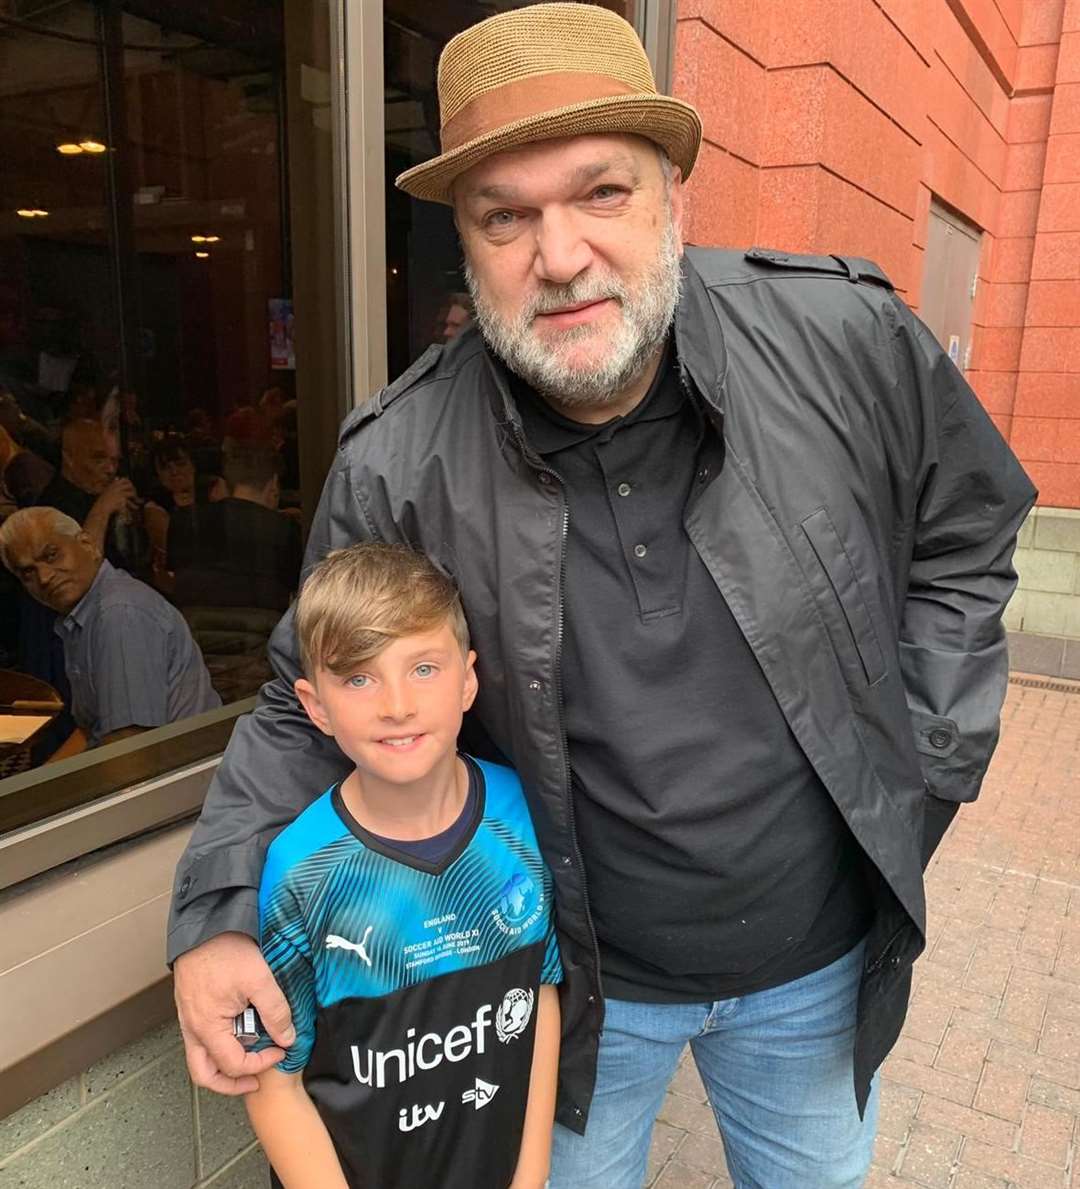 Humphrey with Neil ‘Razor’ Ruddock at the official Soccer Aid match